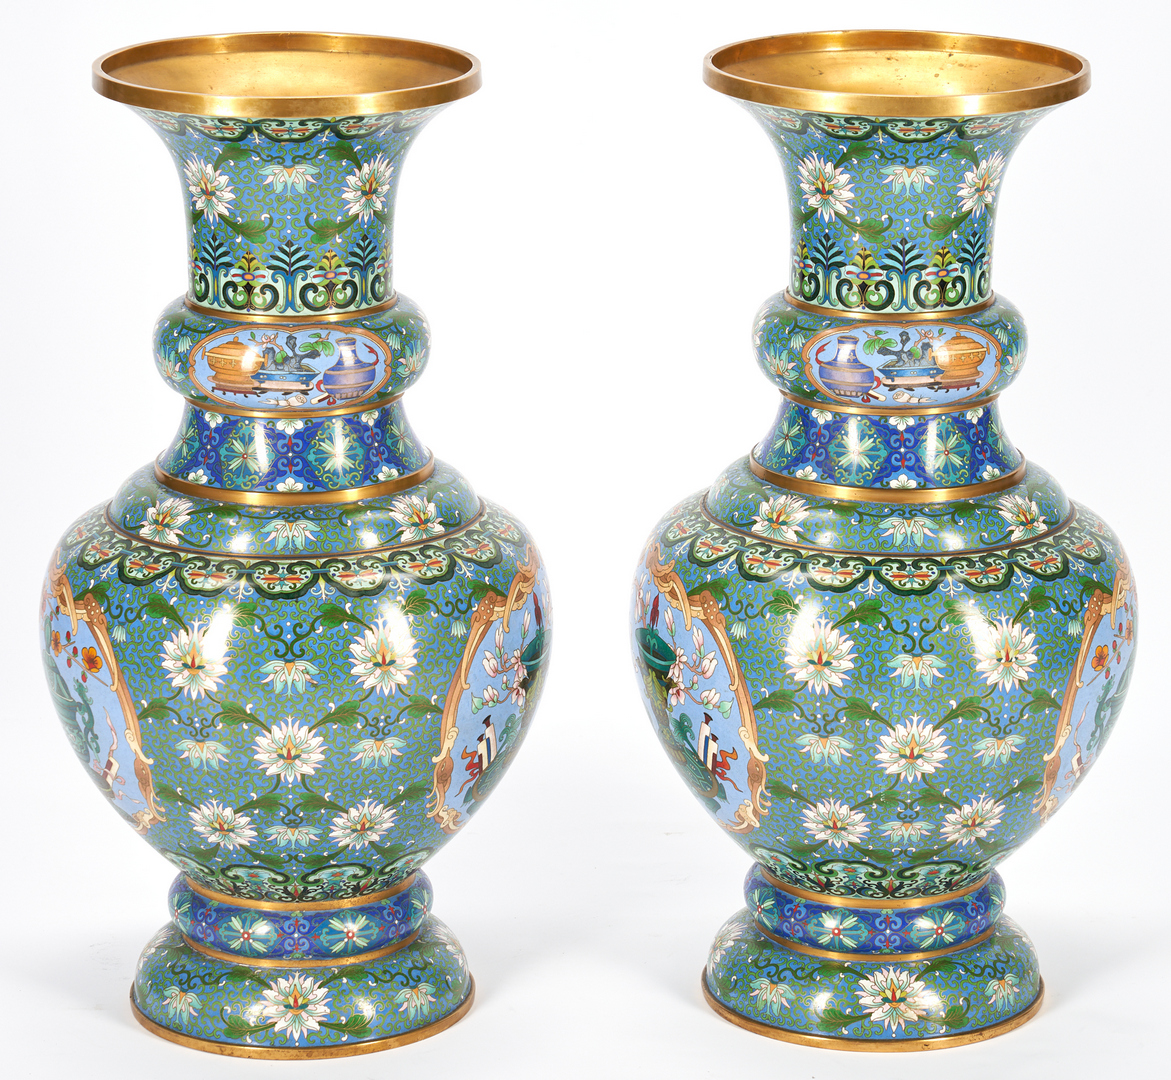 Lot 291: Pair of Chinese Cloisonne Floor Vases